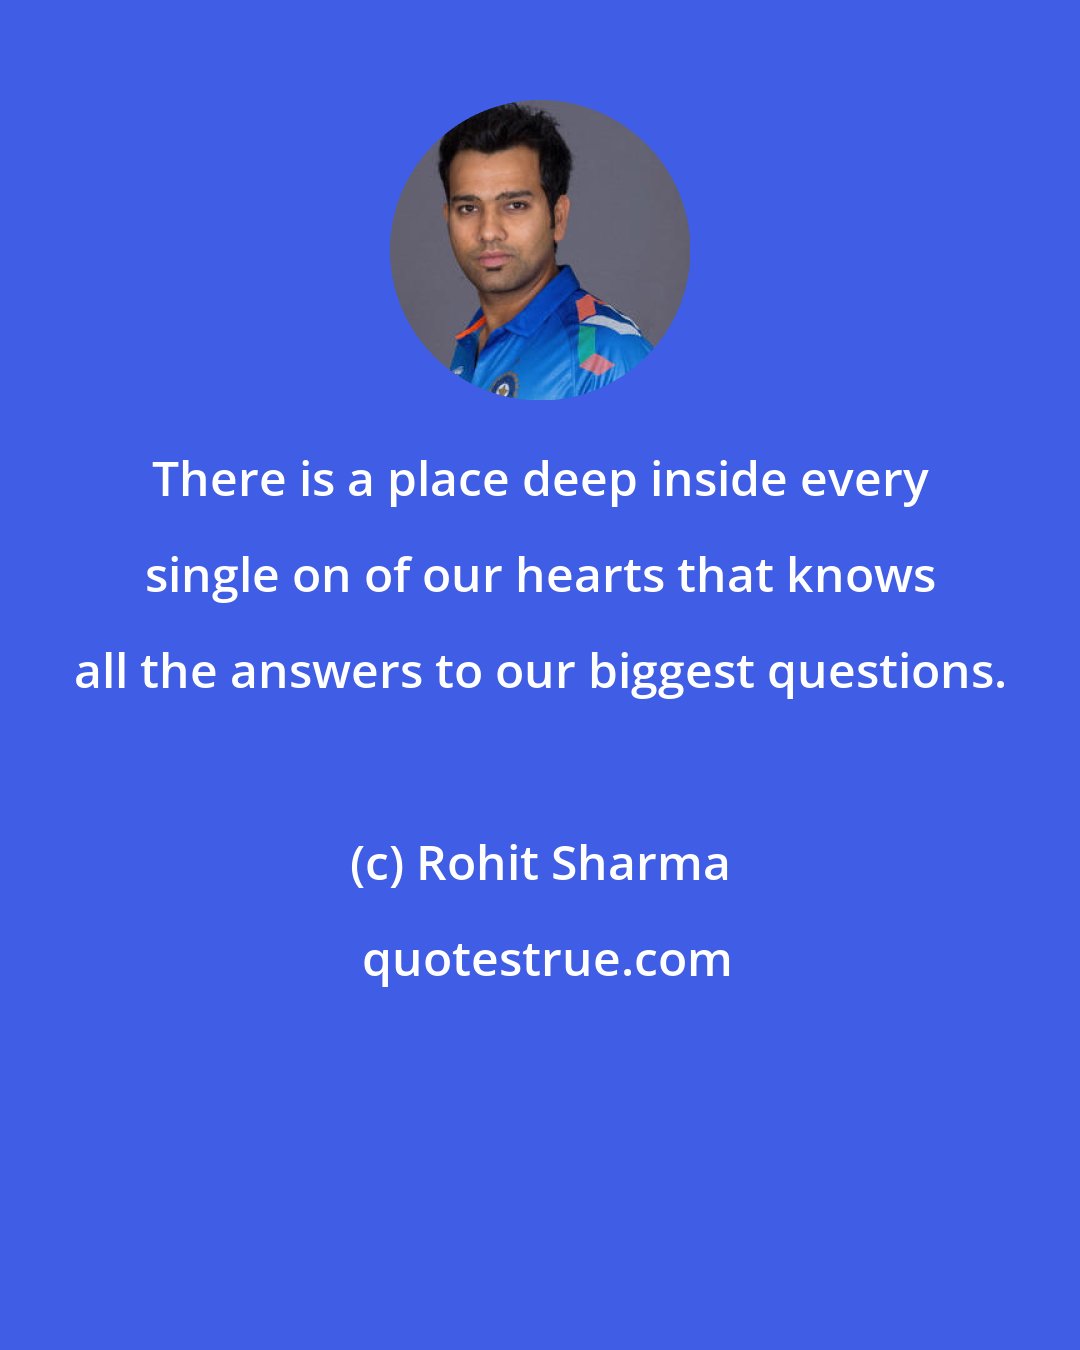 Rohit Sharma: There is a place deep inside every single on of our hearts that knows all the answers to our biggest questions.